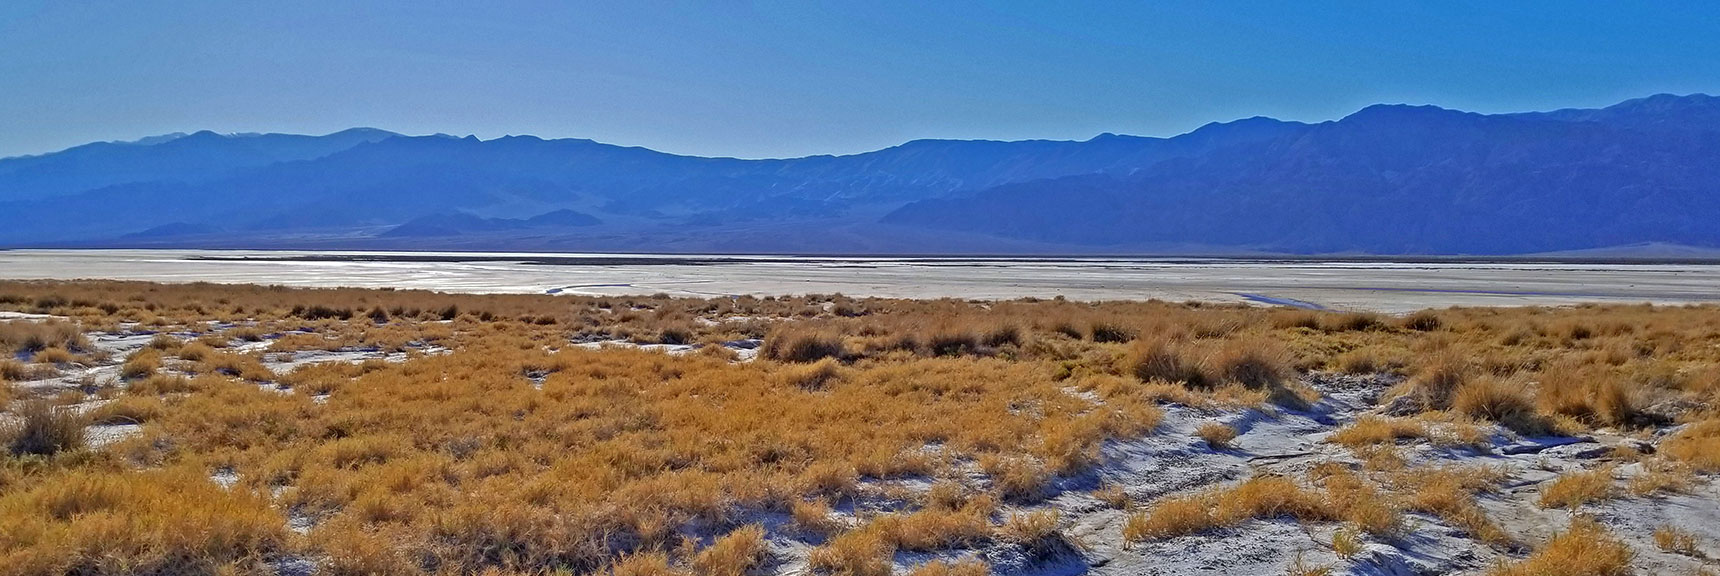 View Across the Salt Grass Zone Toward the Temporary Lake in Death Valley. | Return of Lake Manly (Lake in Death Valley) | Death Valley National Park, California